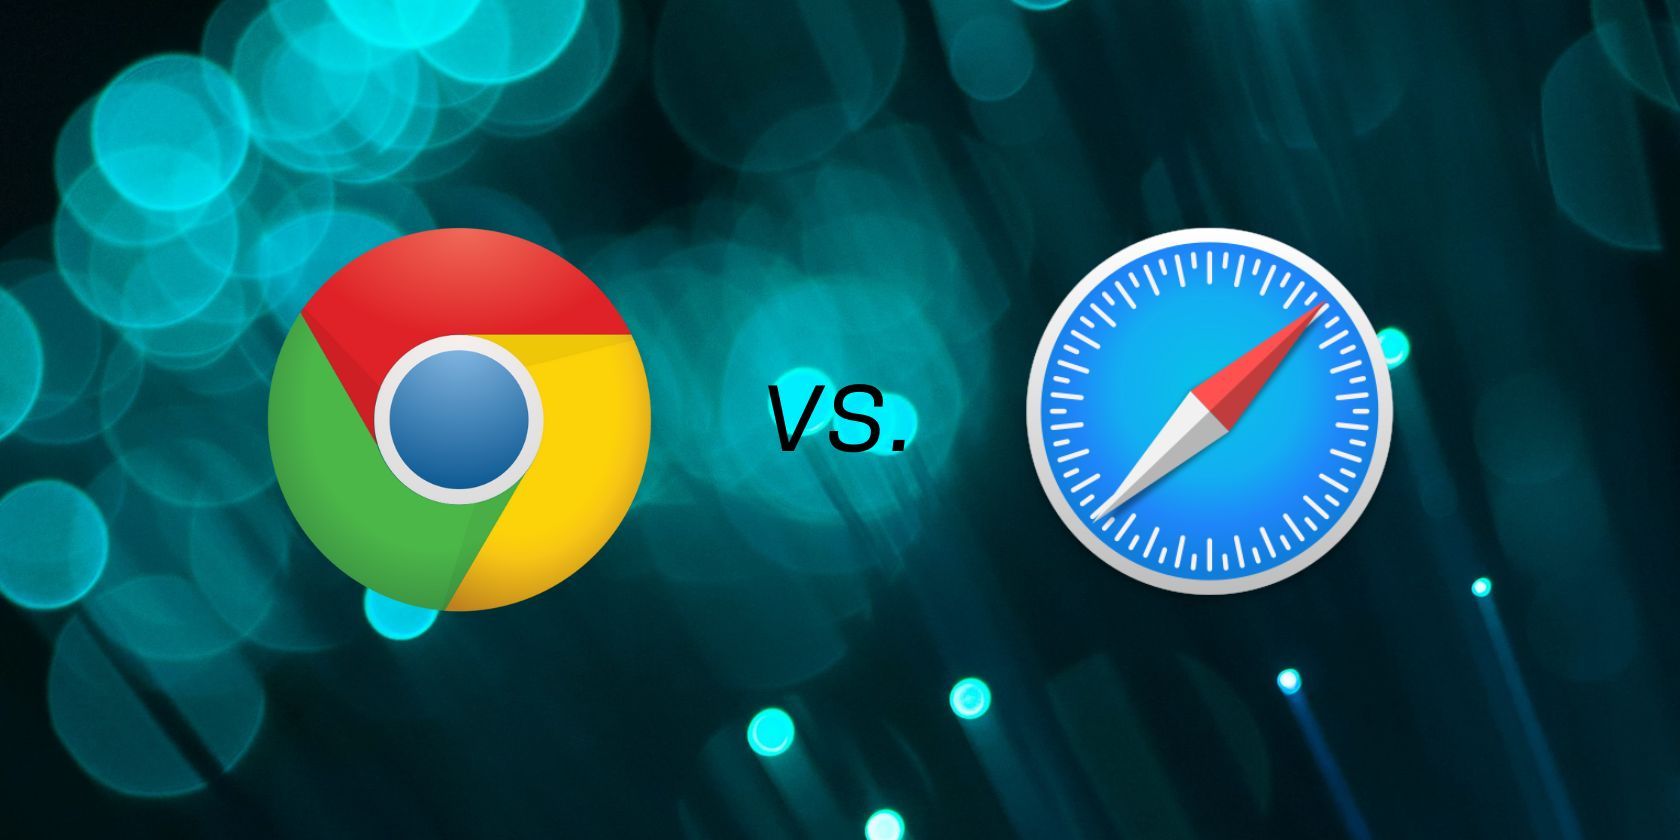 chrome and safari logos in front of close up shot of fiber optic cables